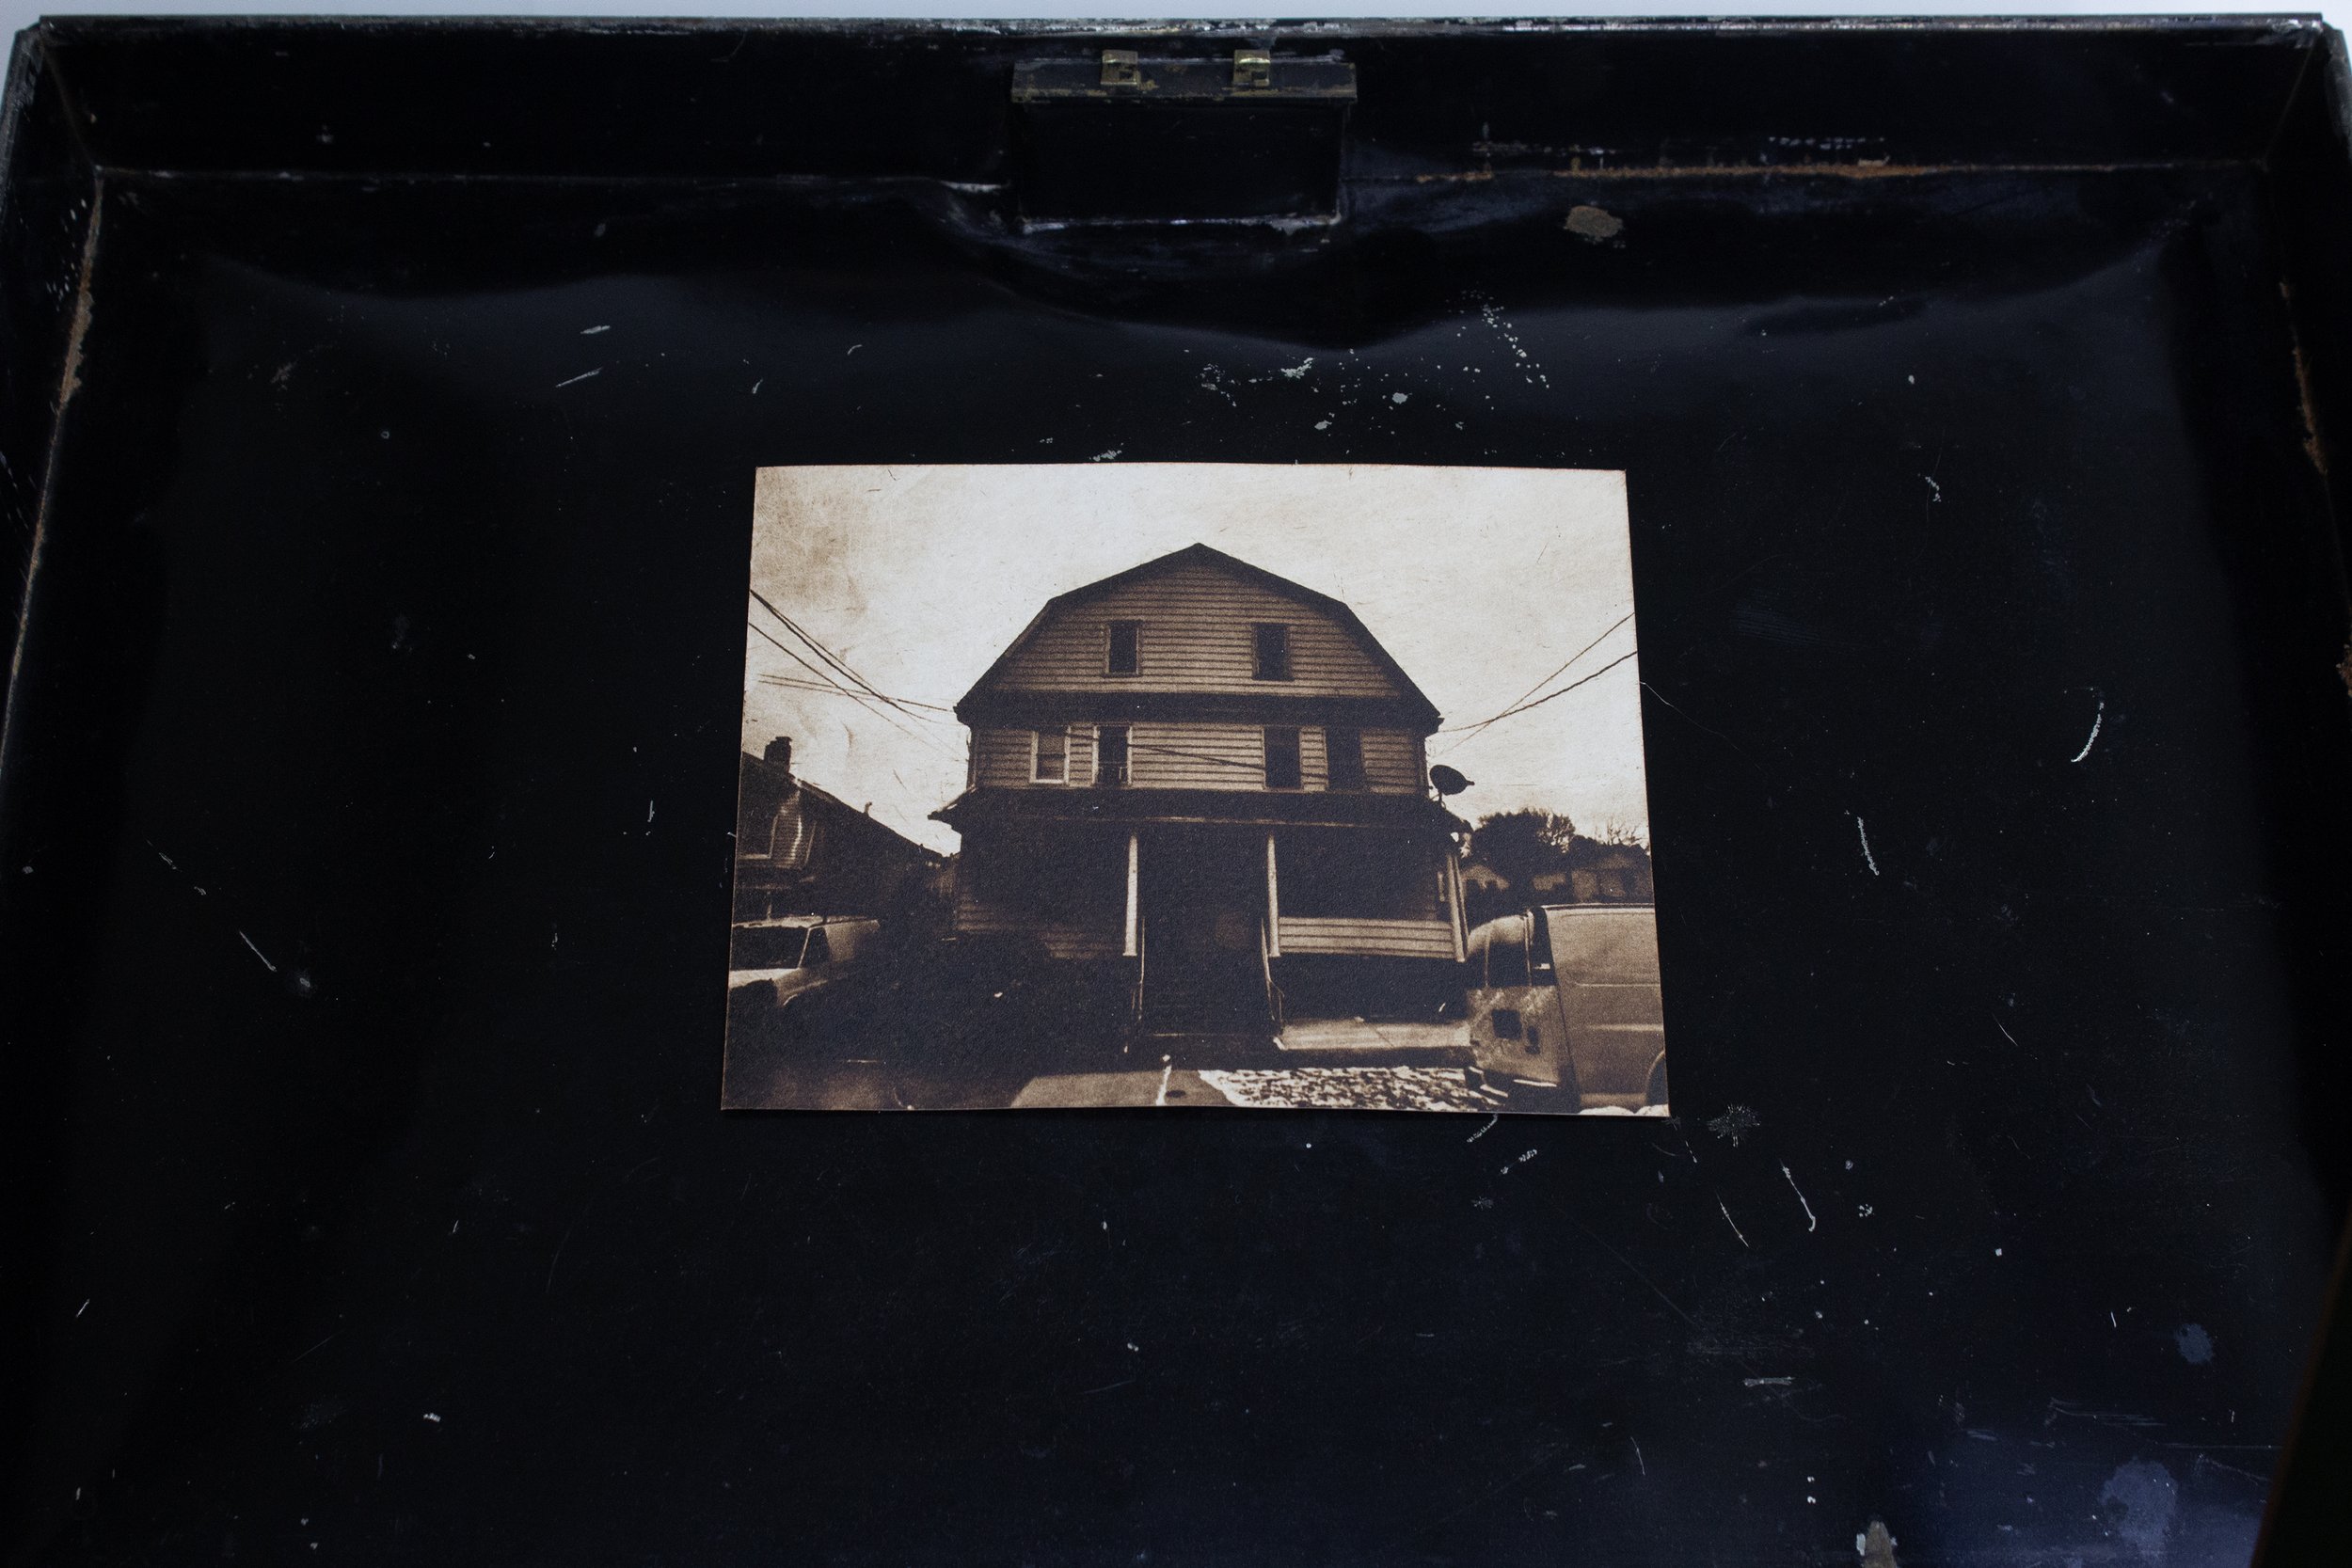 Photoetching of Great Grandmother's house on inside of box lid